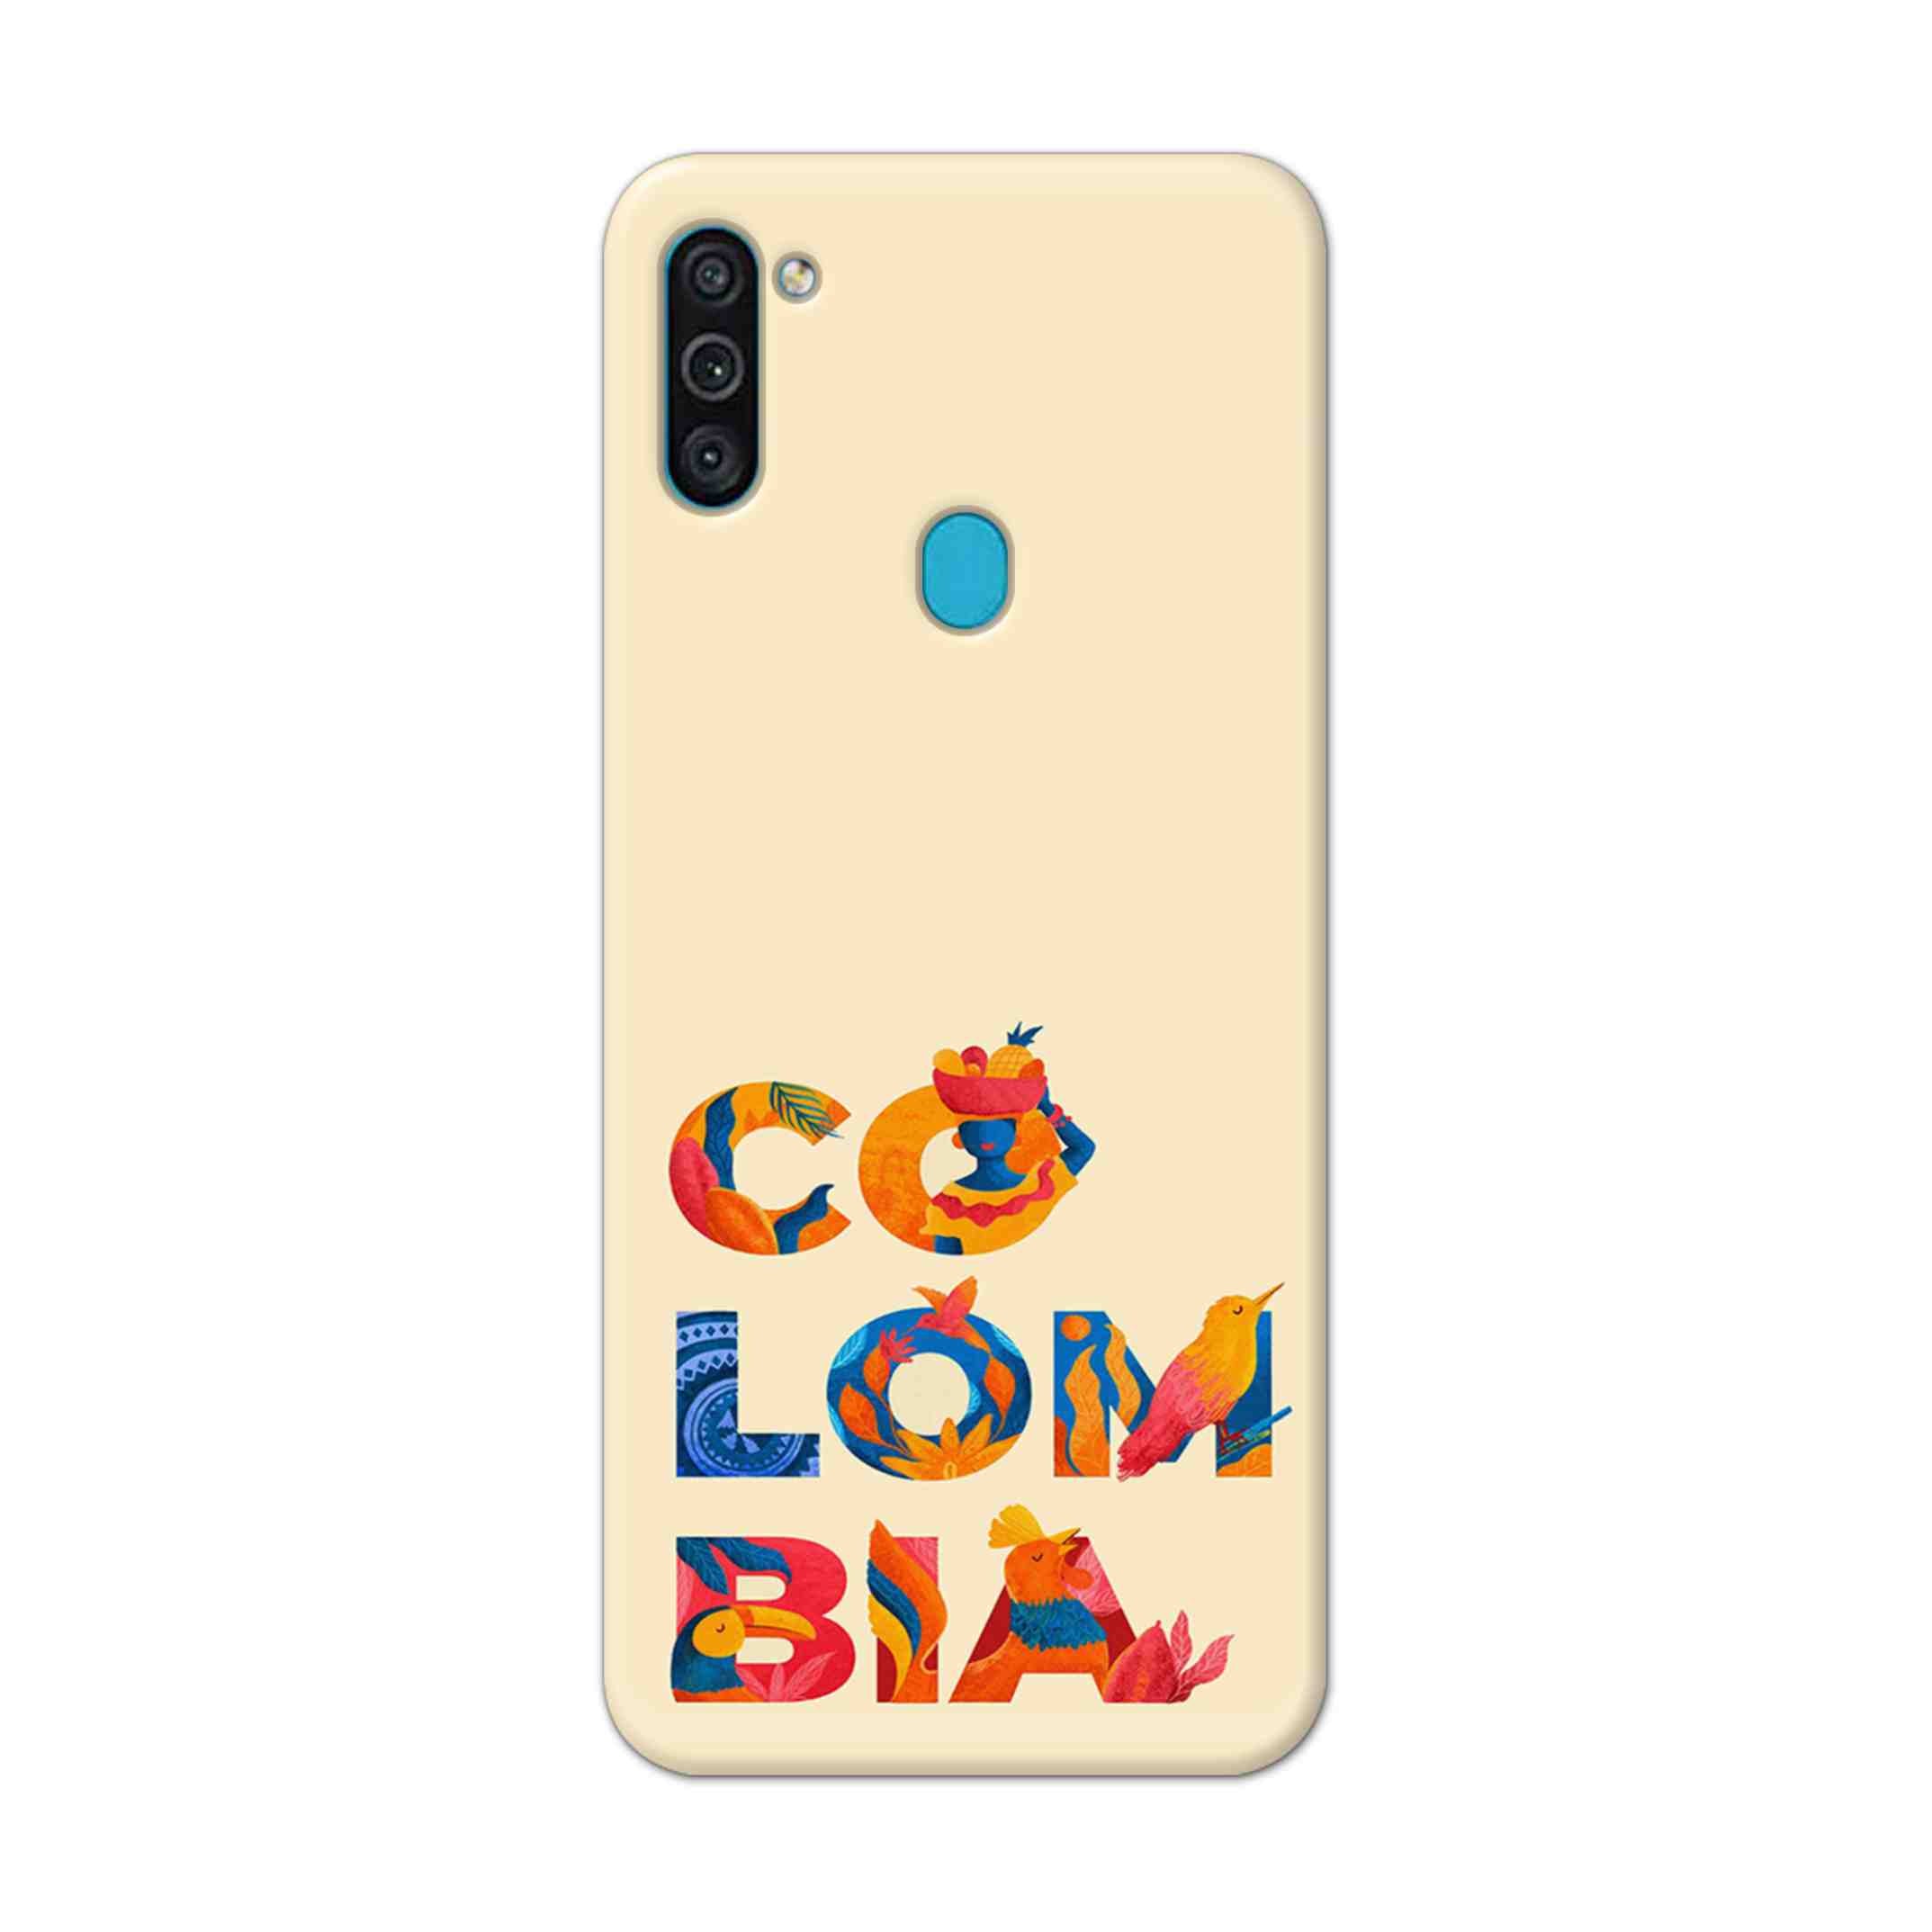 Buy Colombia Hard Back Mobile Phone Case Cover For Samsung Galaxy M11 Online